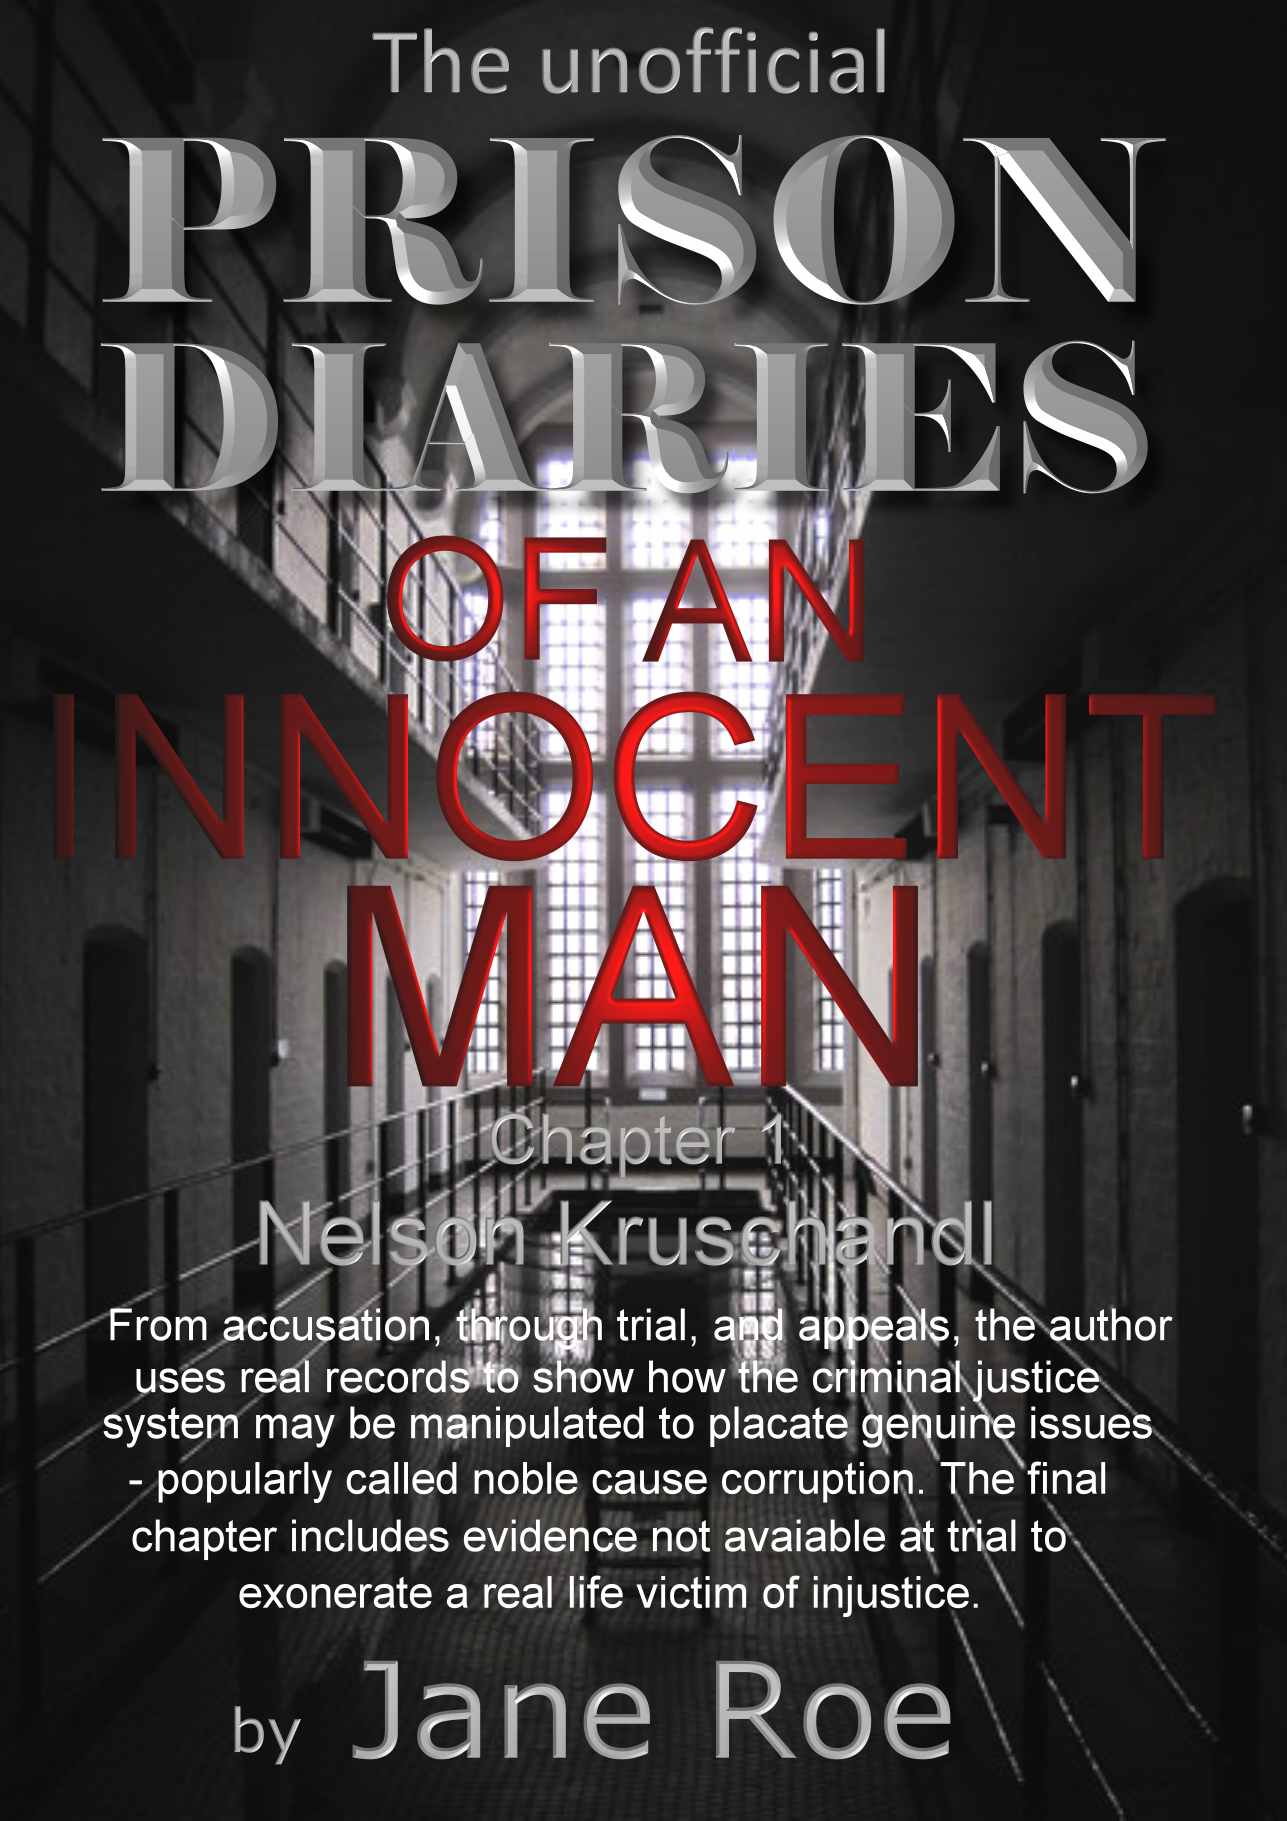 The Unofficial Prison Diaries, An Innocent Man, Nelson Kruschandl - by Jane Roe